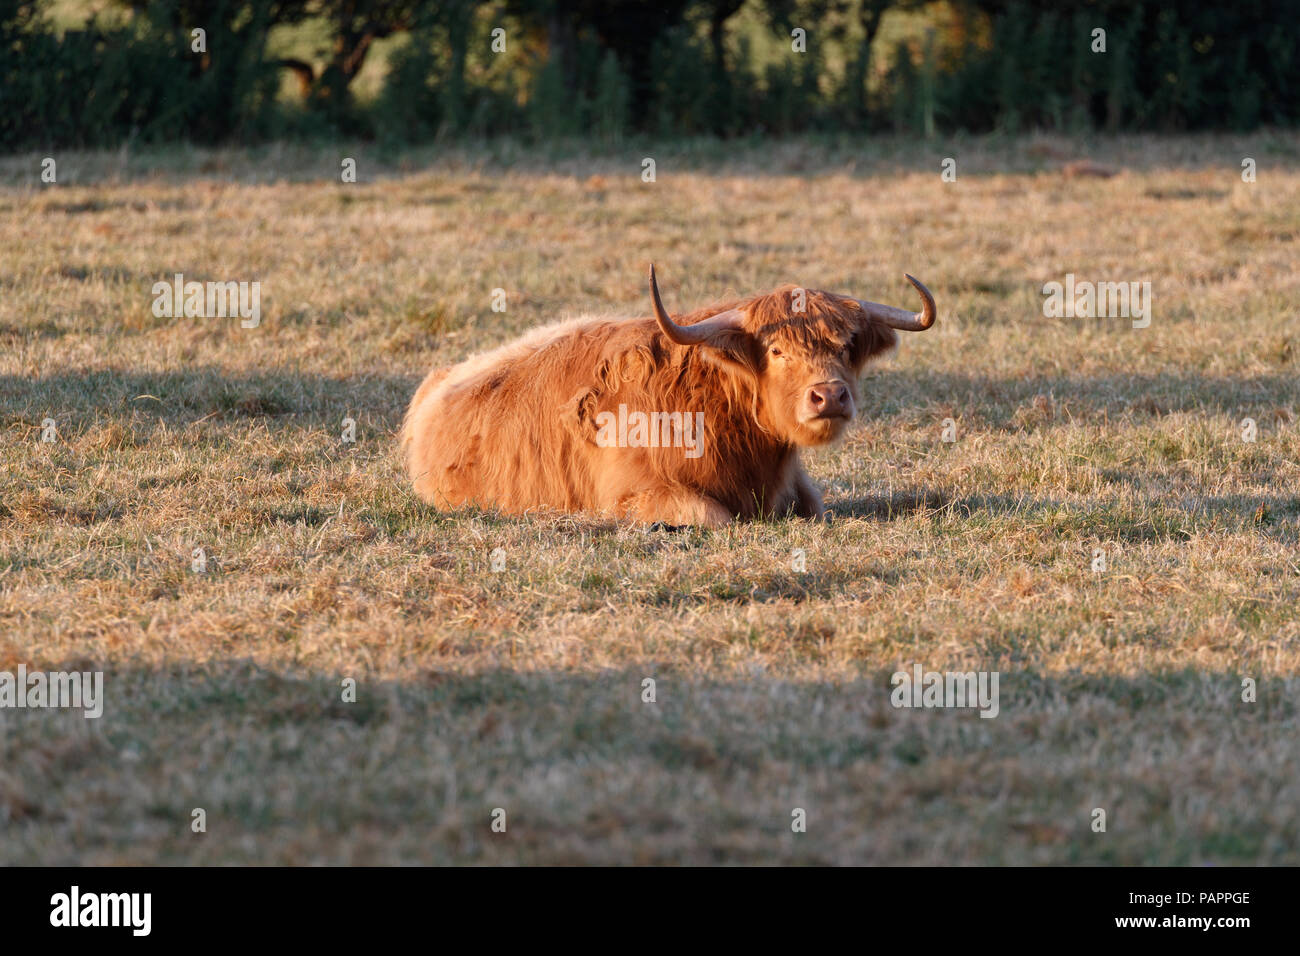 Highland Cattle resting in summer sunshine not in the wither scene they are usually photographed in Stock Photo